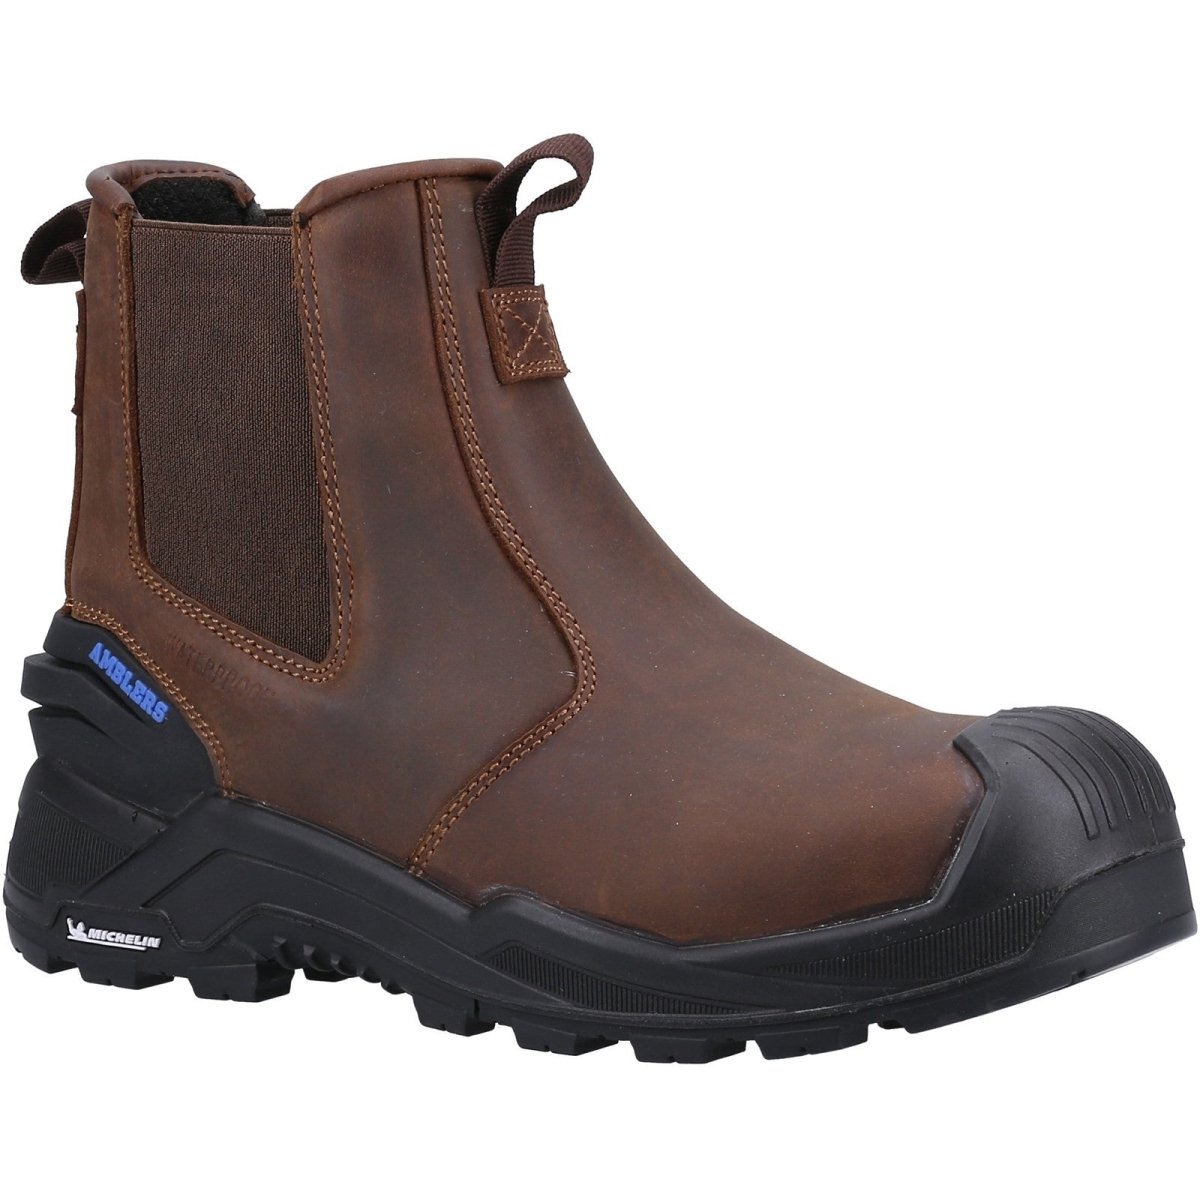 Amblers AS982C Conway S7 Waterproof Safety Dealer Boot - Shoe Store Direct